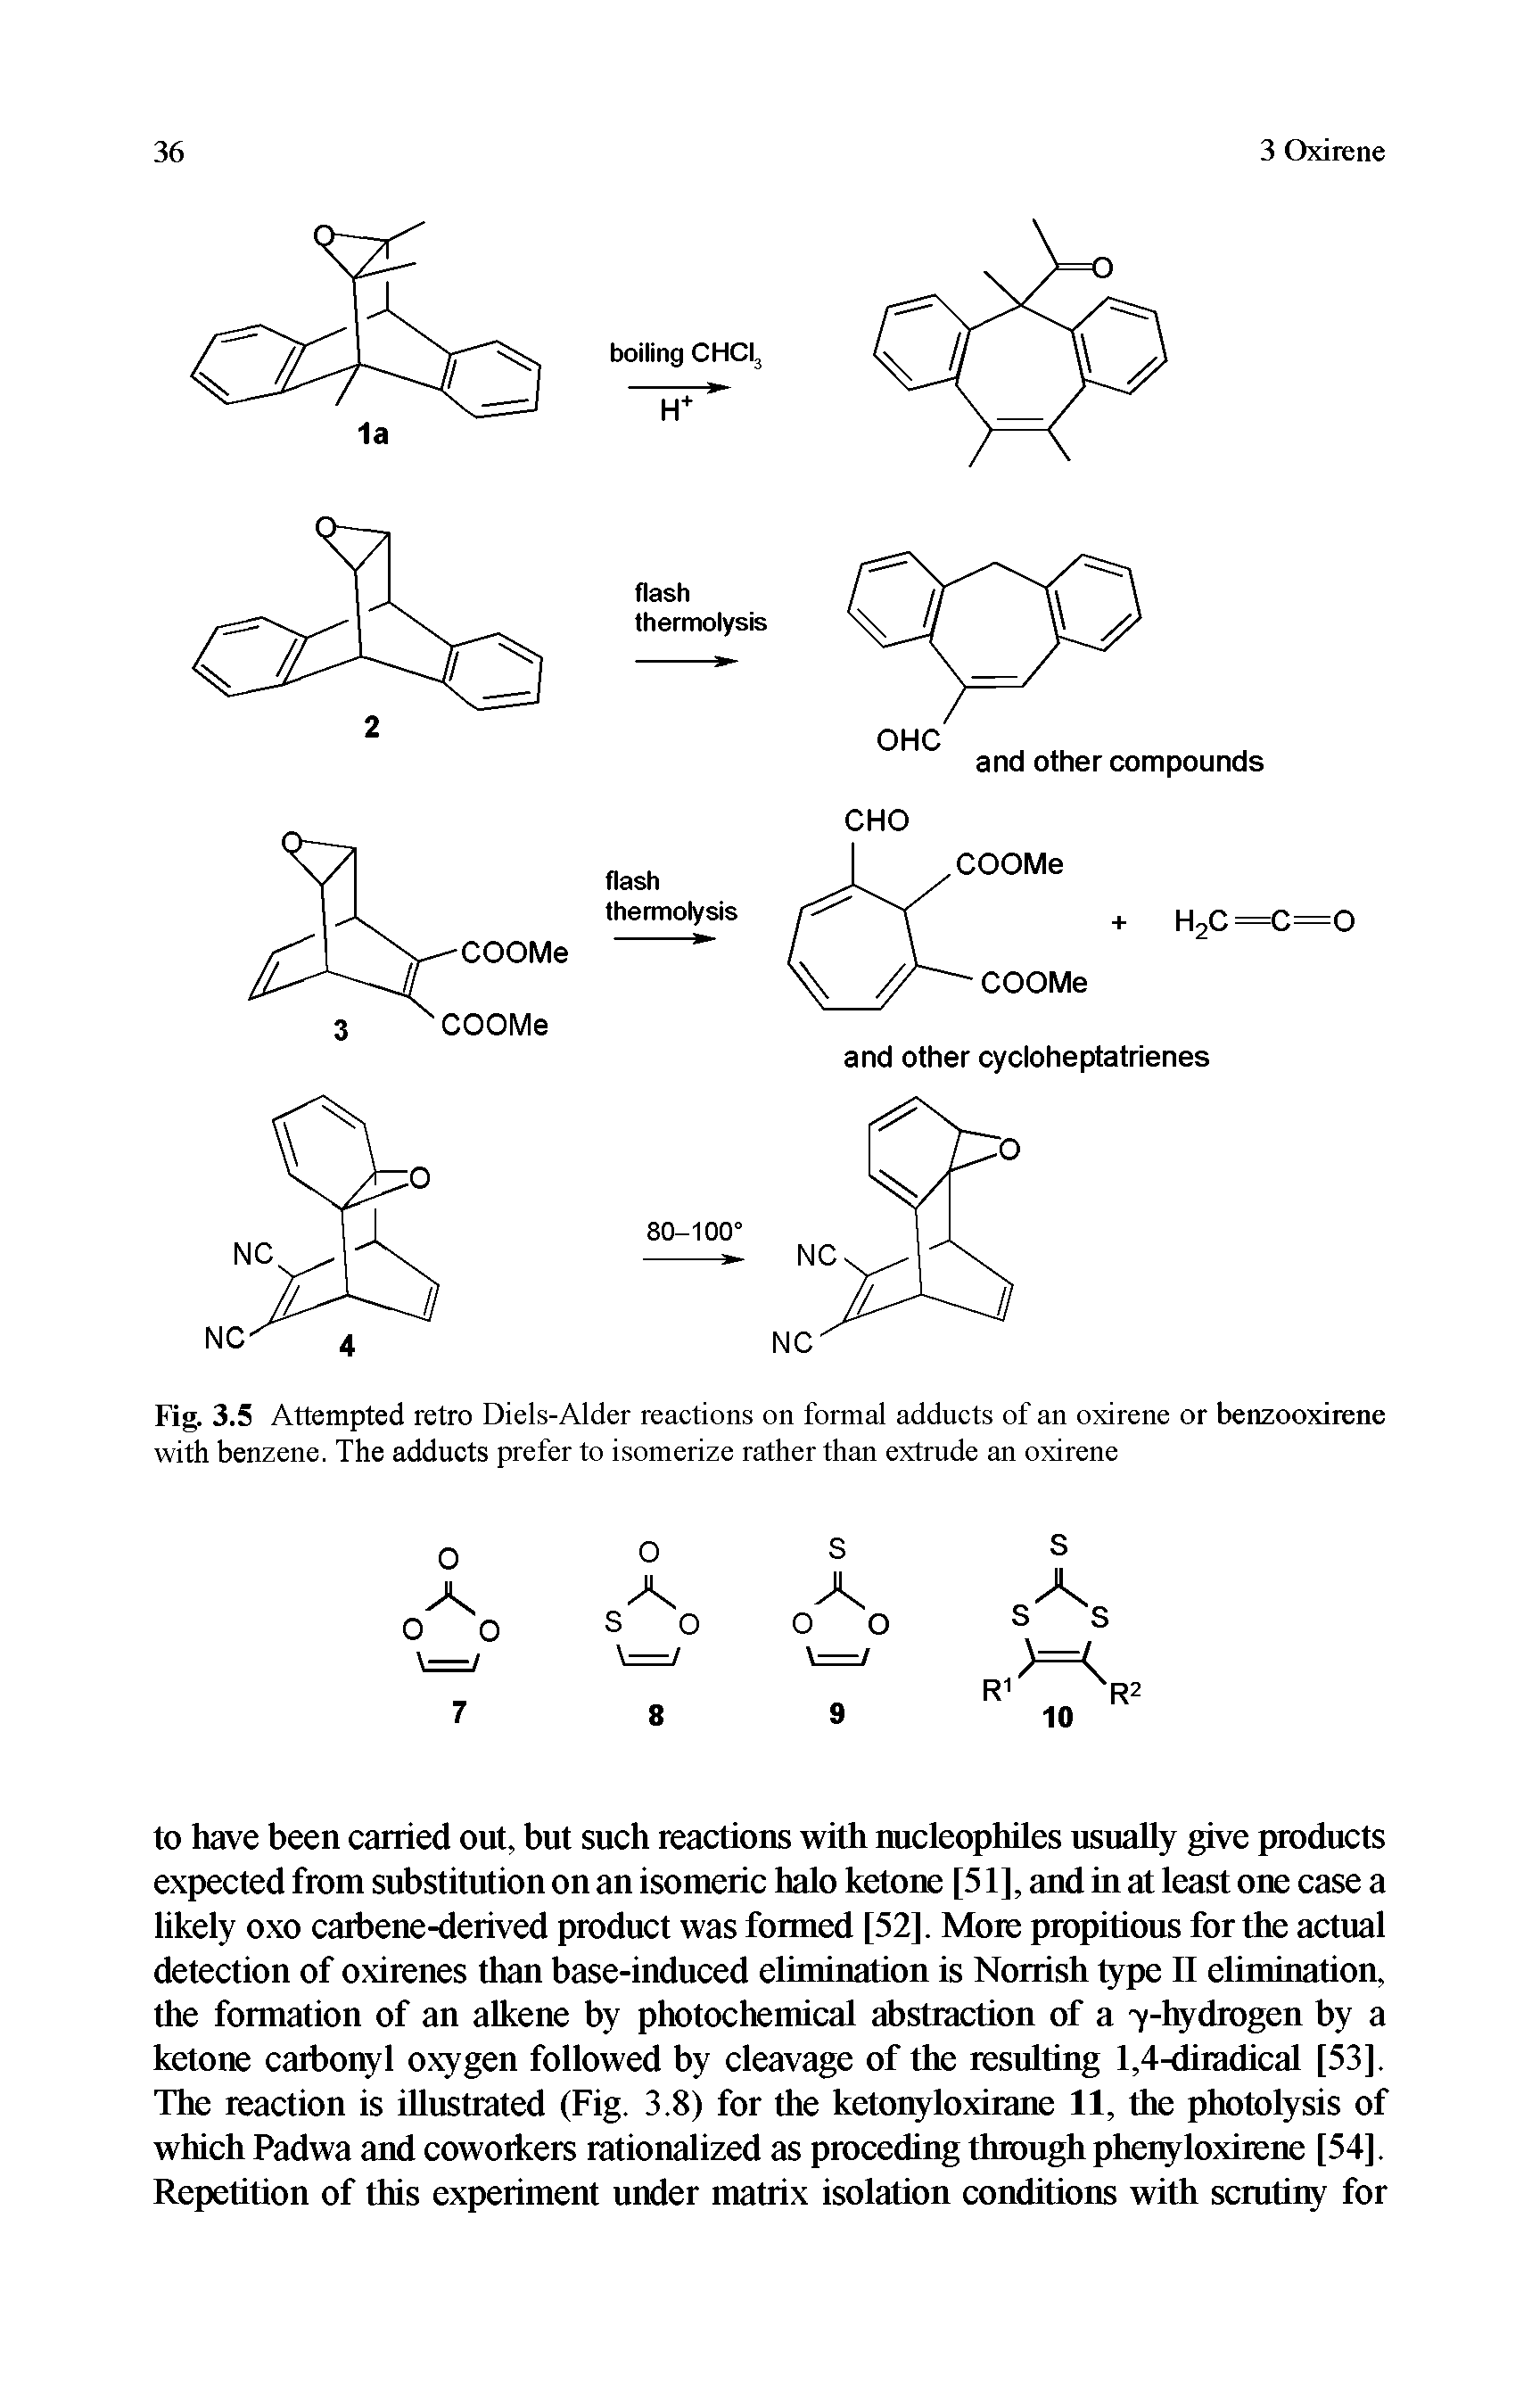 Fig. 3.5 Attempted retro Diels-Alder reactions on formal adducts of an oxirene or benzooxirene with benzene. The adducts prefer to isomerize rather than extrude an oxirene...